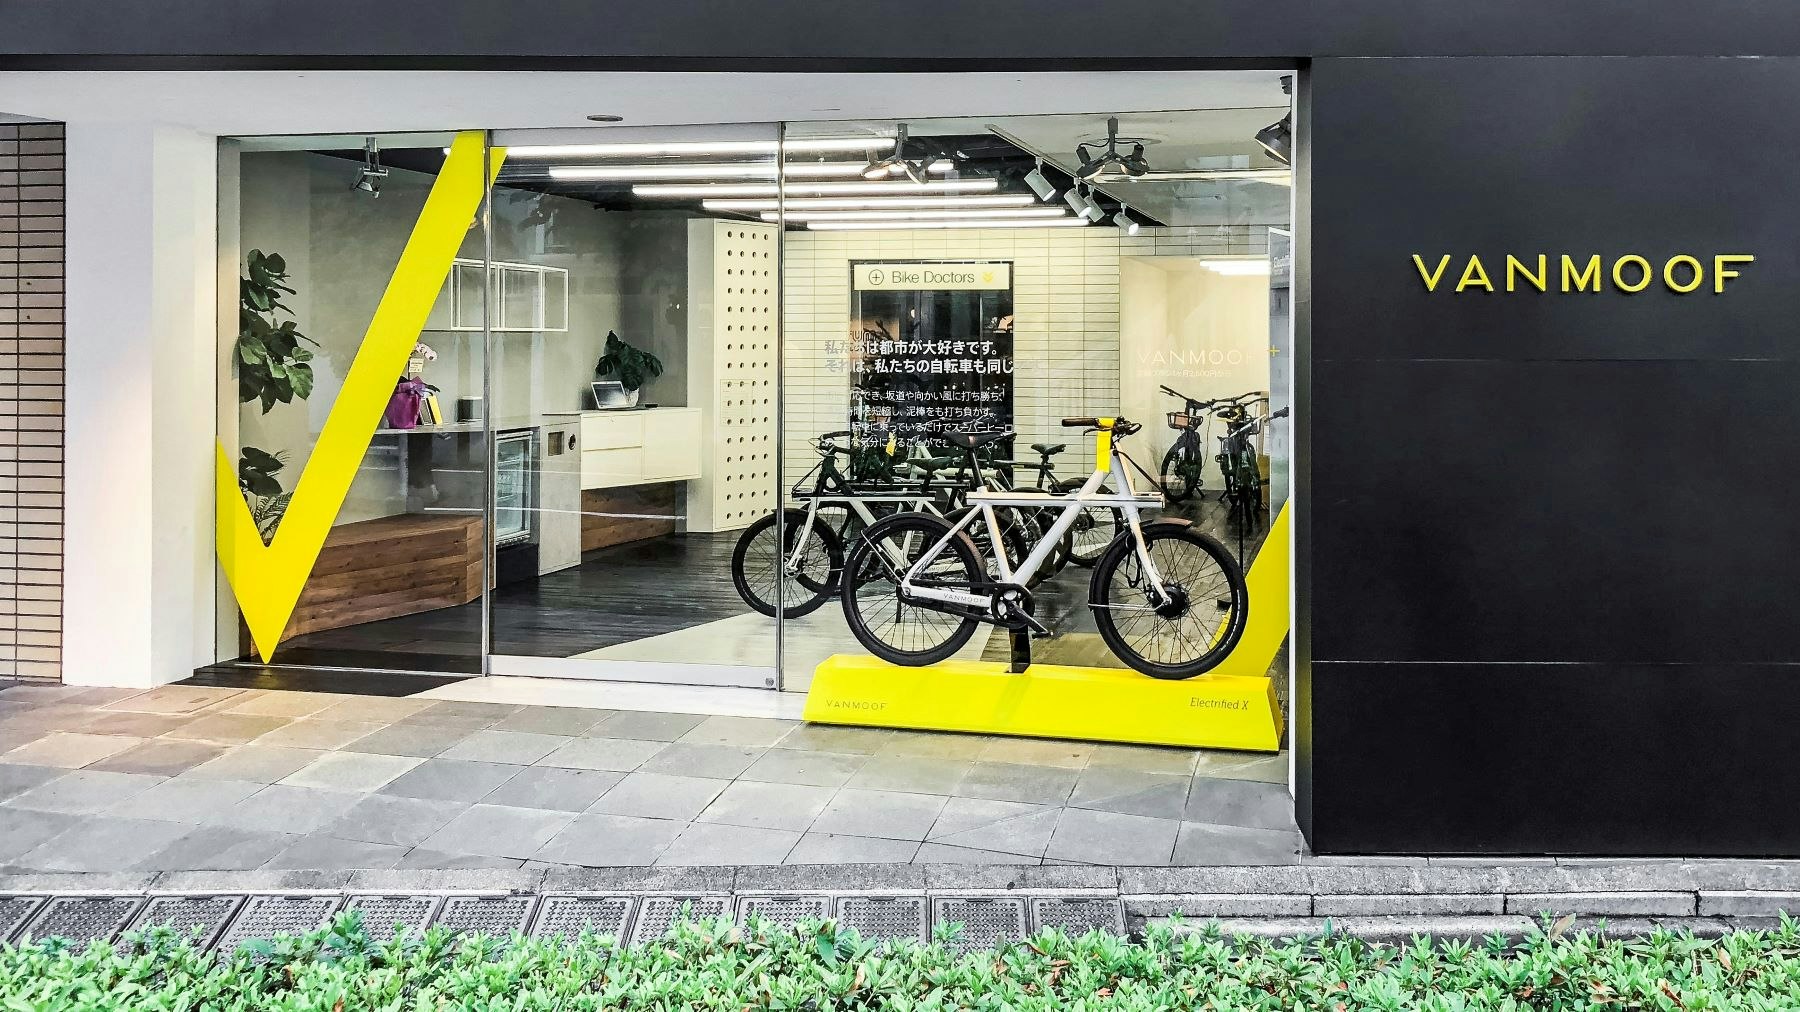 VanMoof The rise and fall of a market disrupter